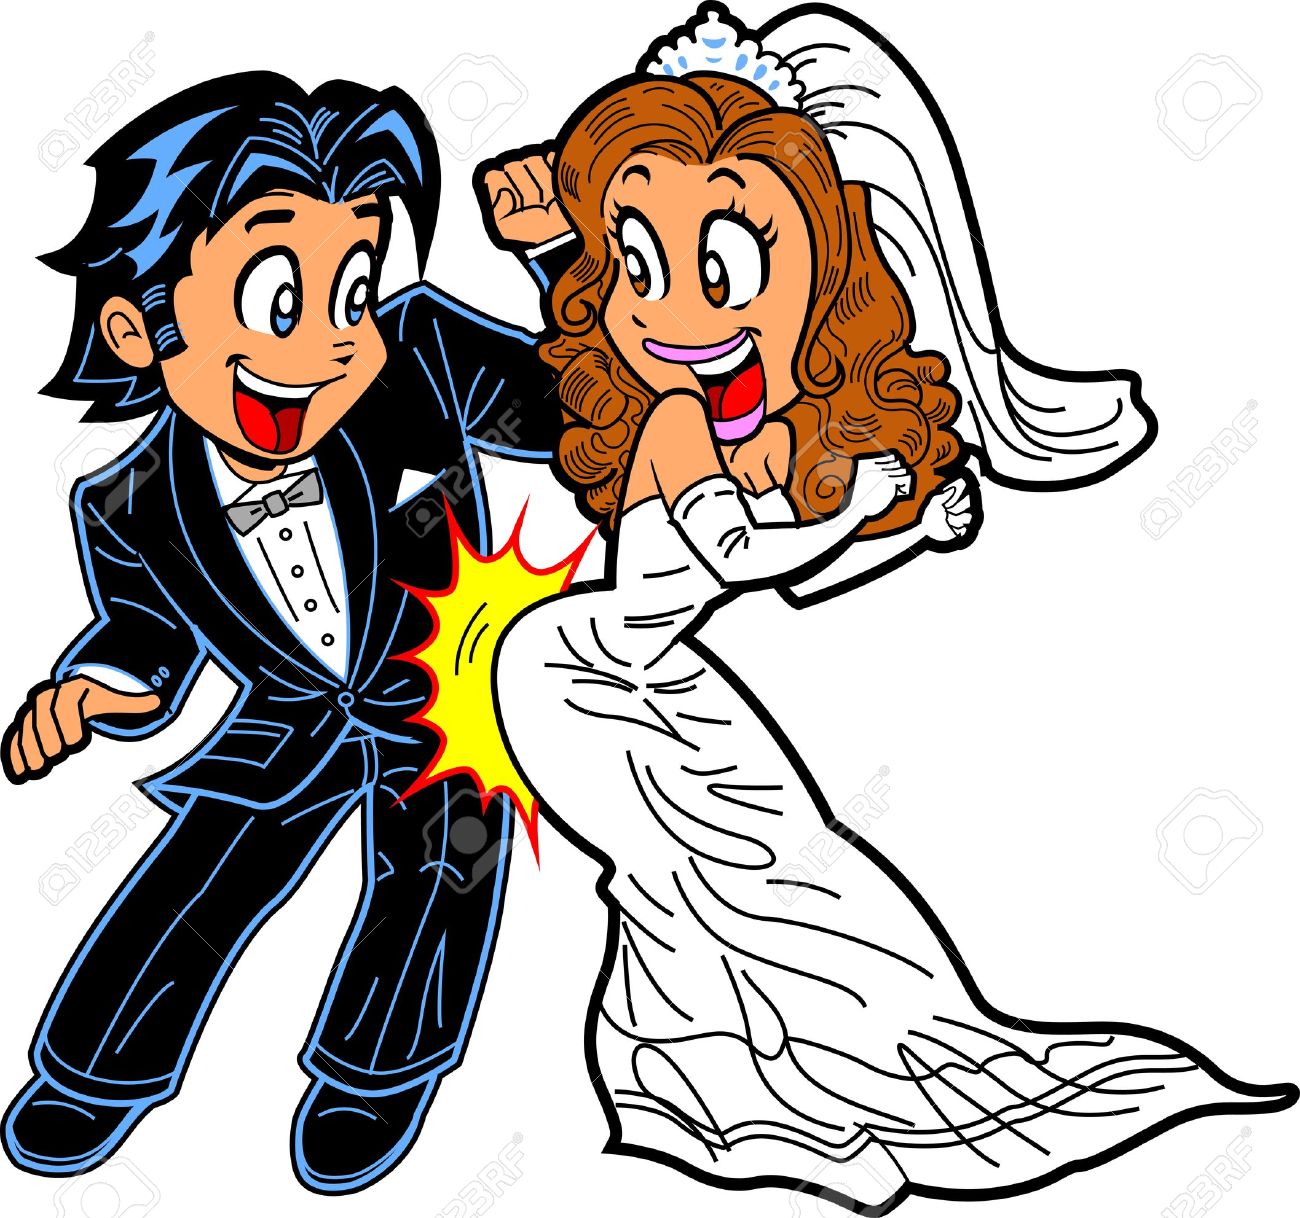 Happy Just Married Couple Doing the Wedding Dance Stock Vector - 20686094